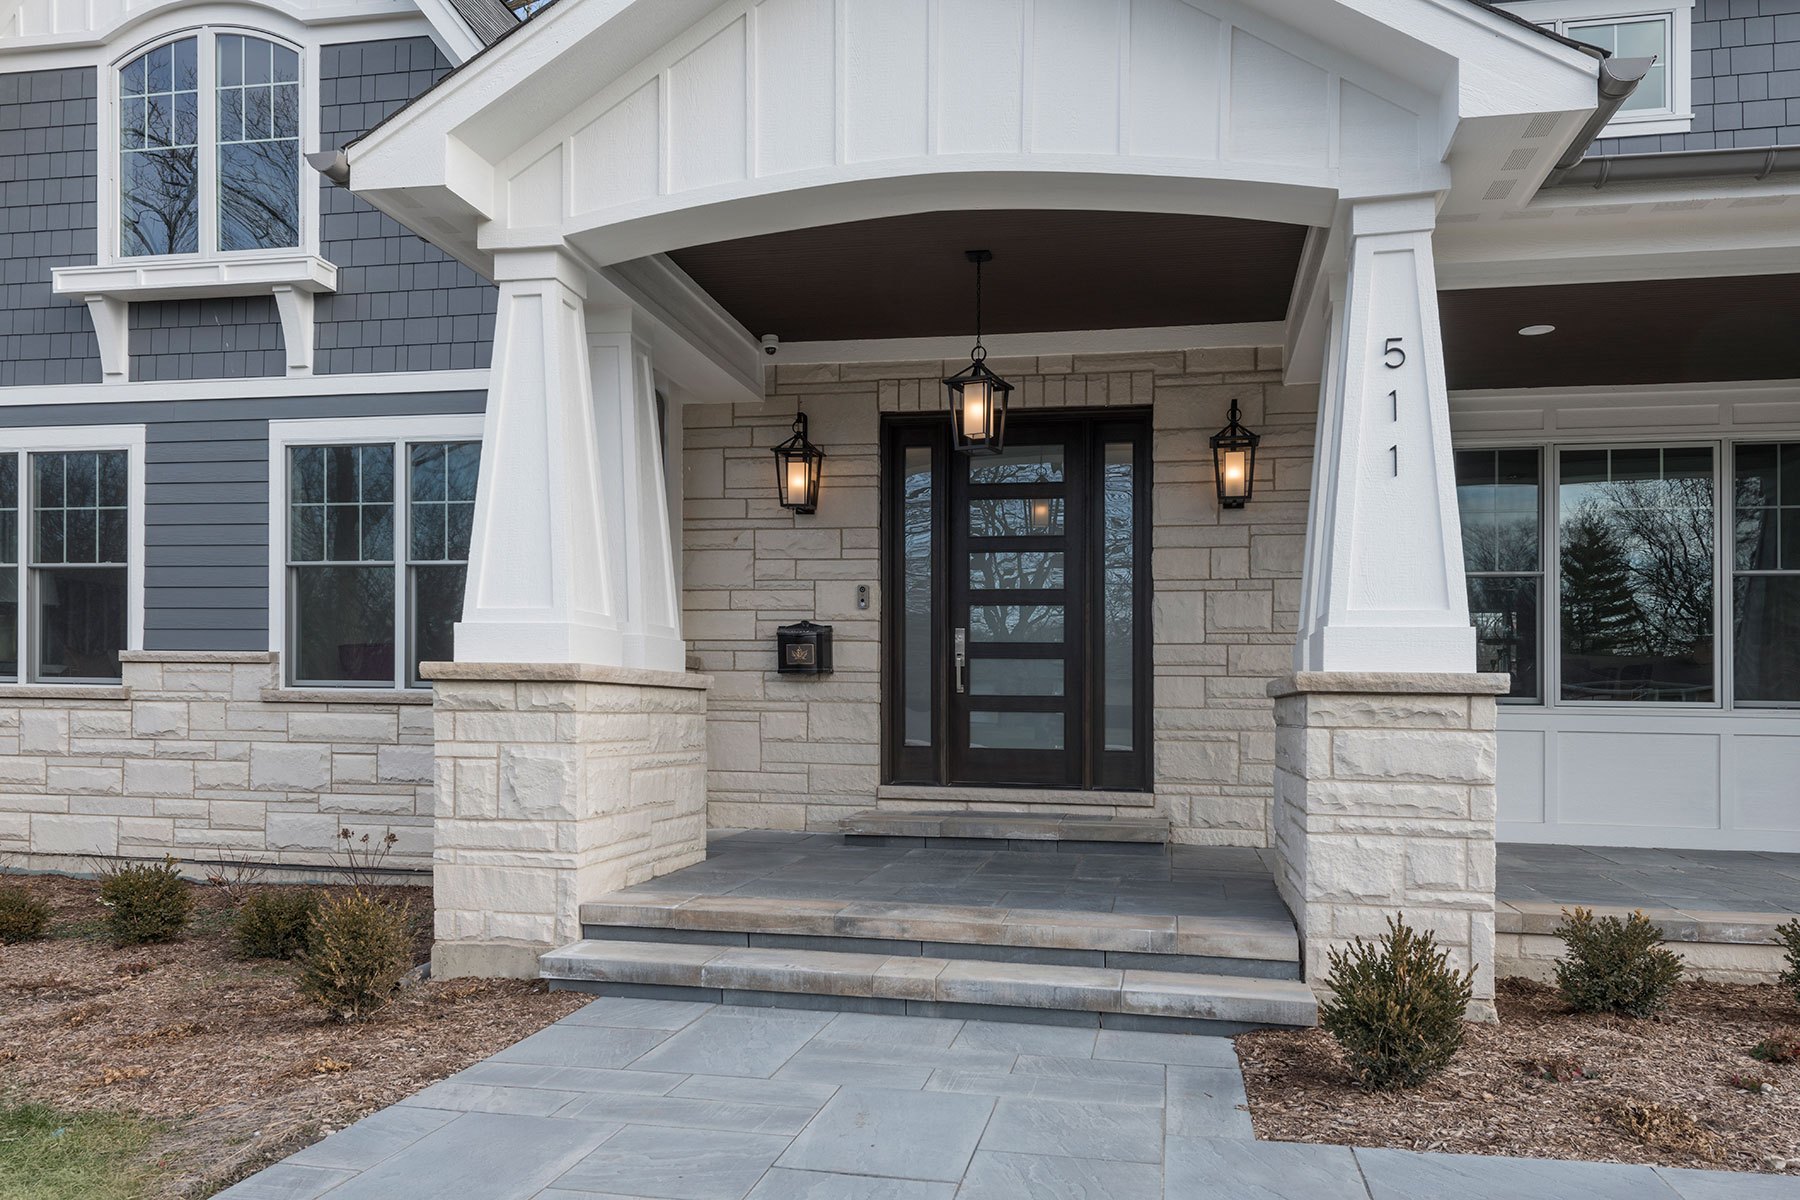 Front Door Entrance - 511 N Branch Rd., Glenview, IL Custom Home. America's Custom Home Builders: New Construction, Remodeling, Restoration Services. Residential and Commercial.